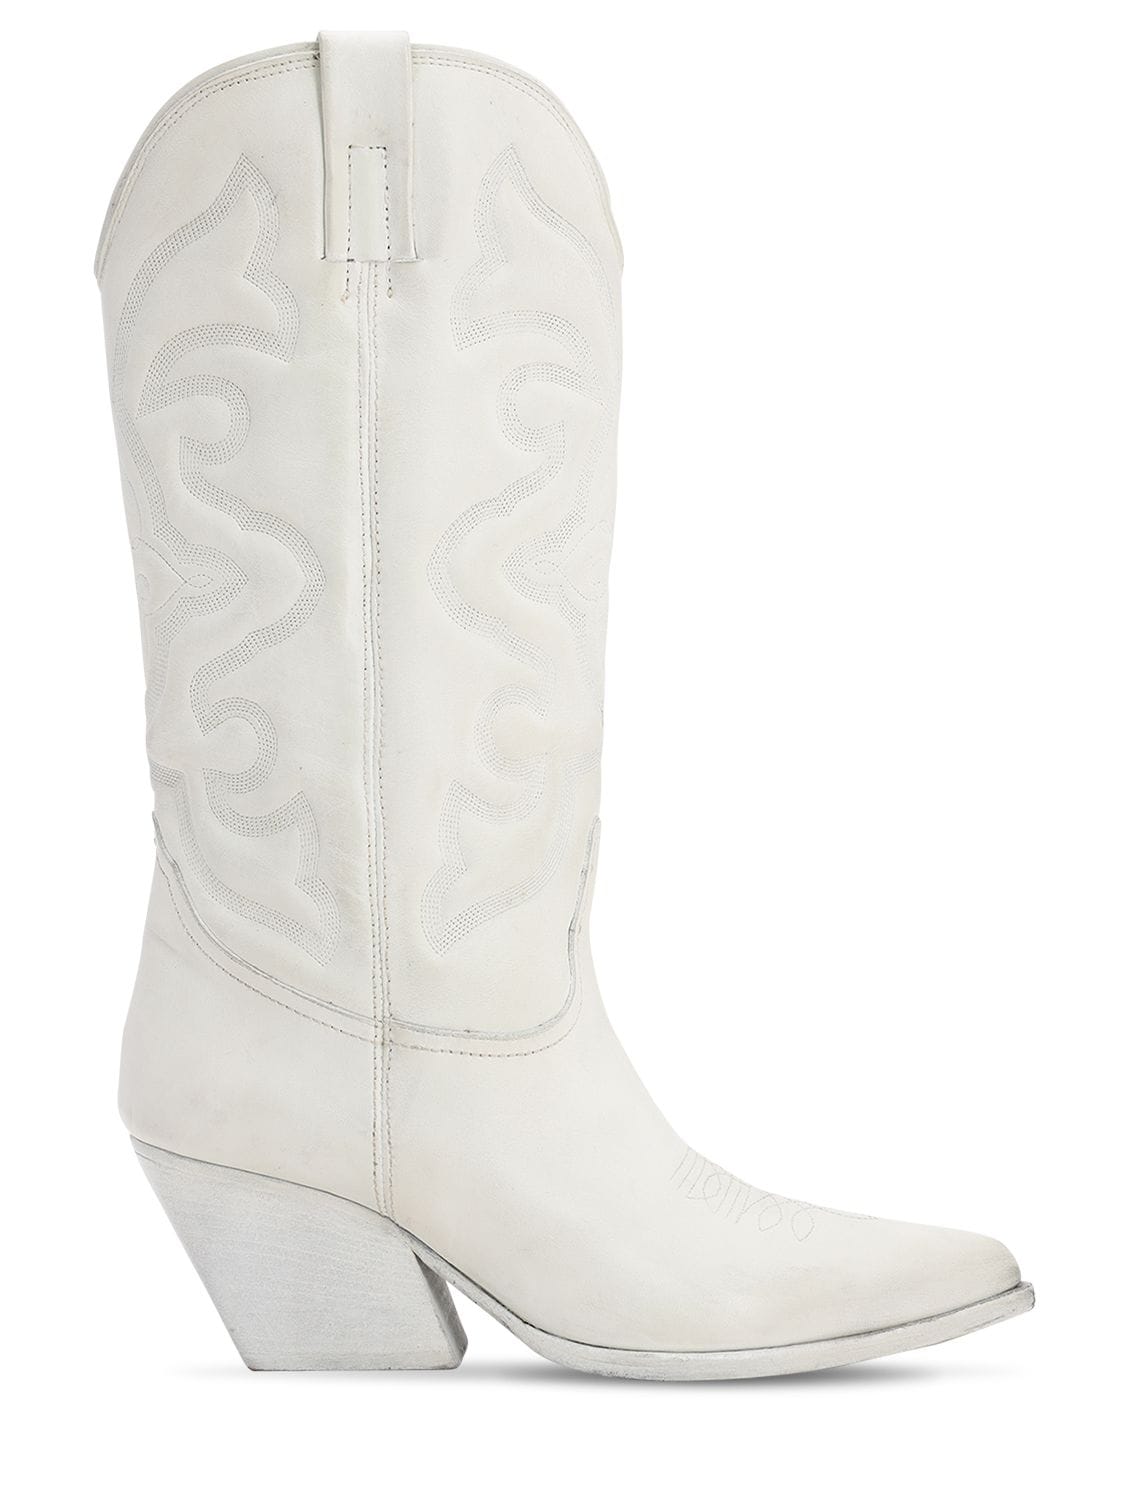 white tall cowboy boots